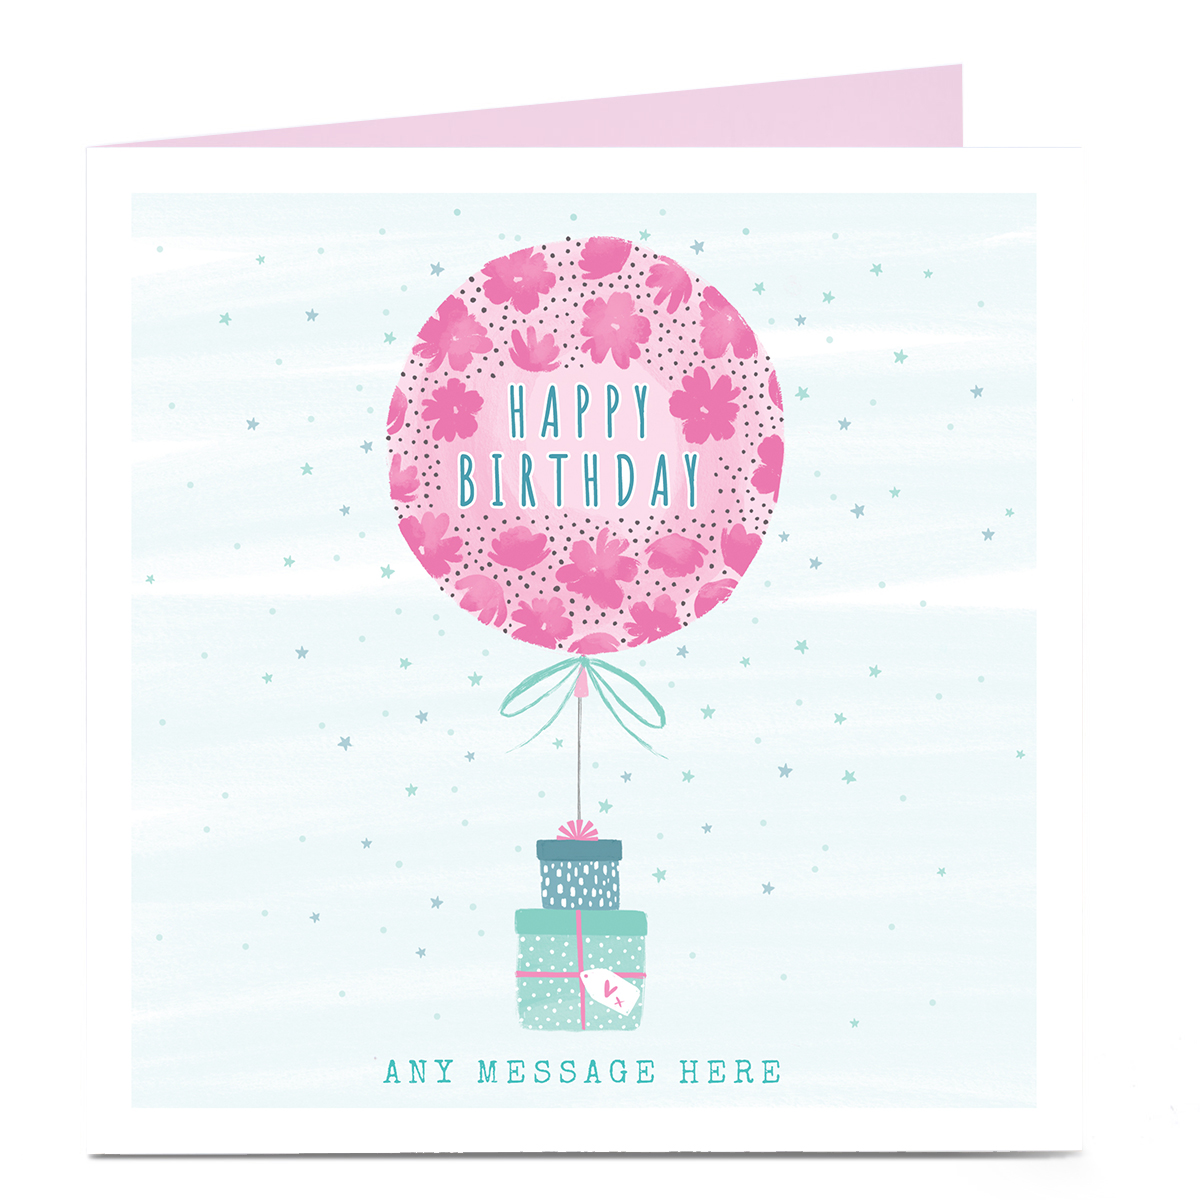 Personalised Charity Birthday Card - Pink Balloon & Gifts